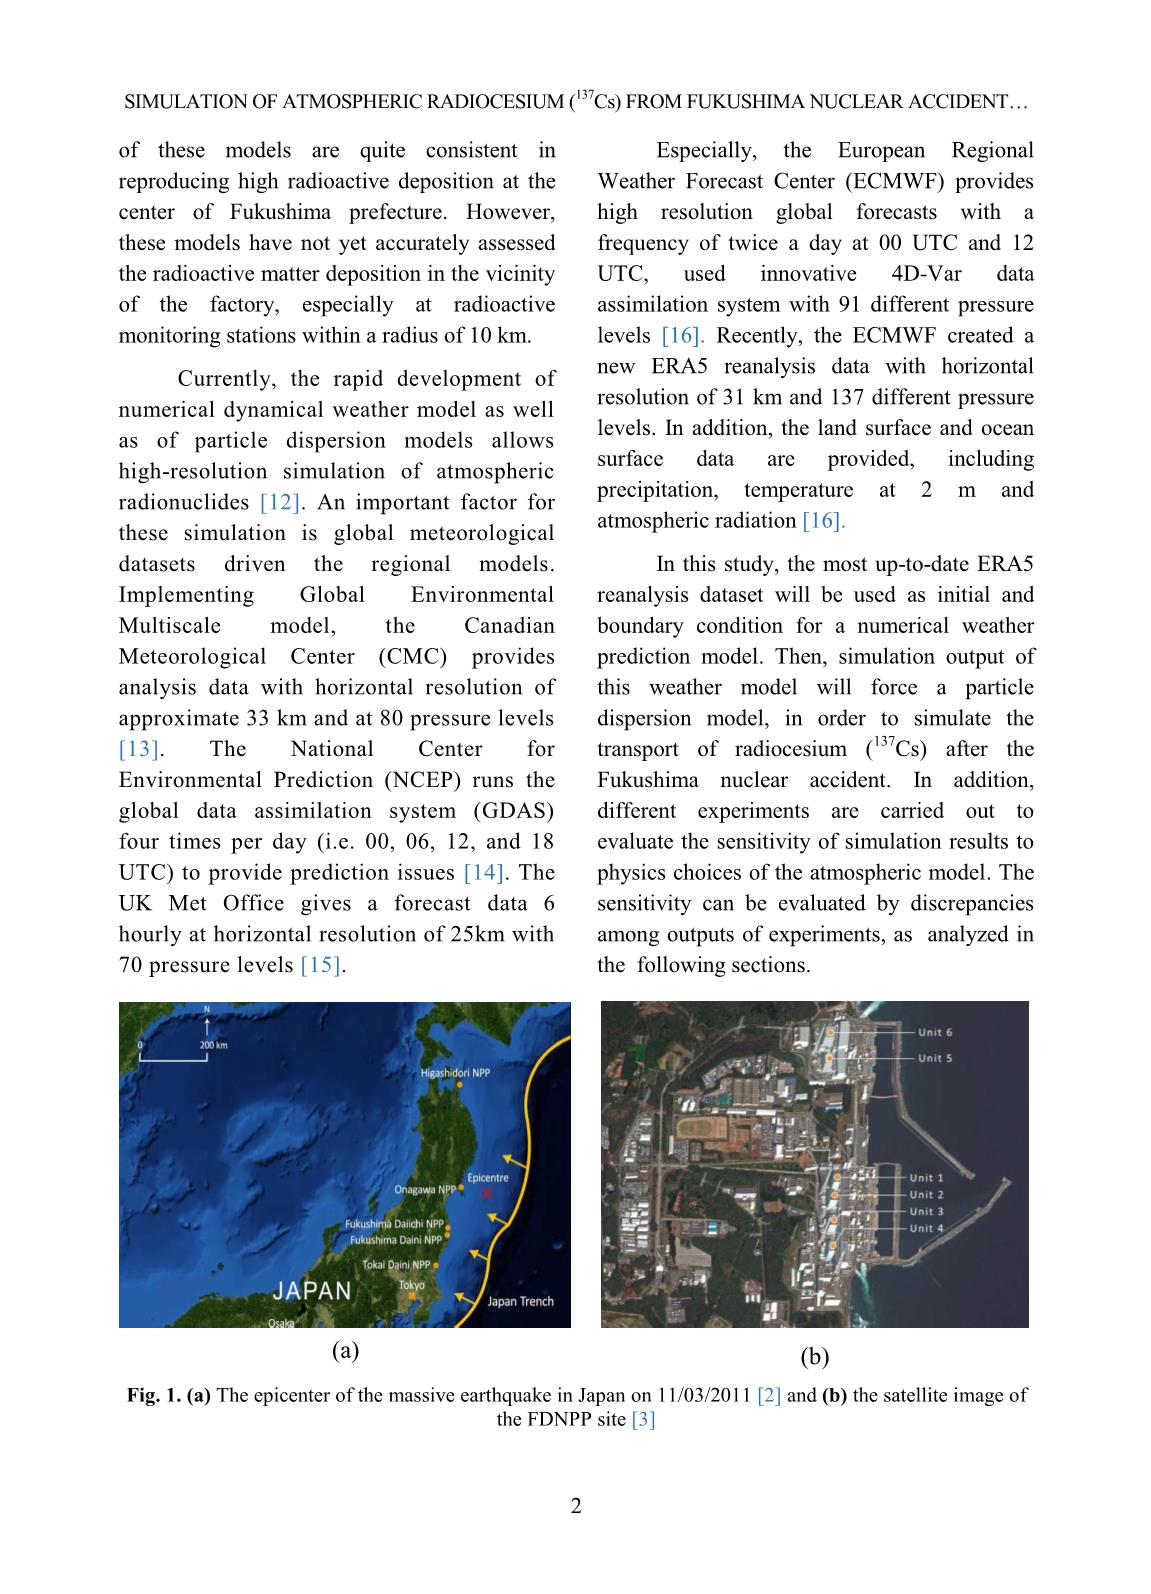 Nuclear Science and Technology - Volume 10, Number 3, September 2020 trang 5